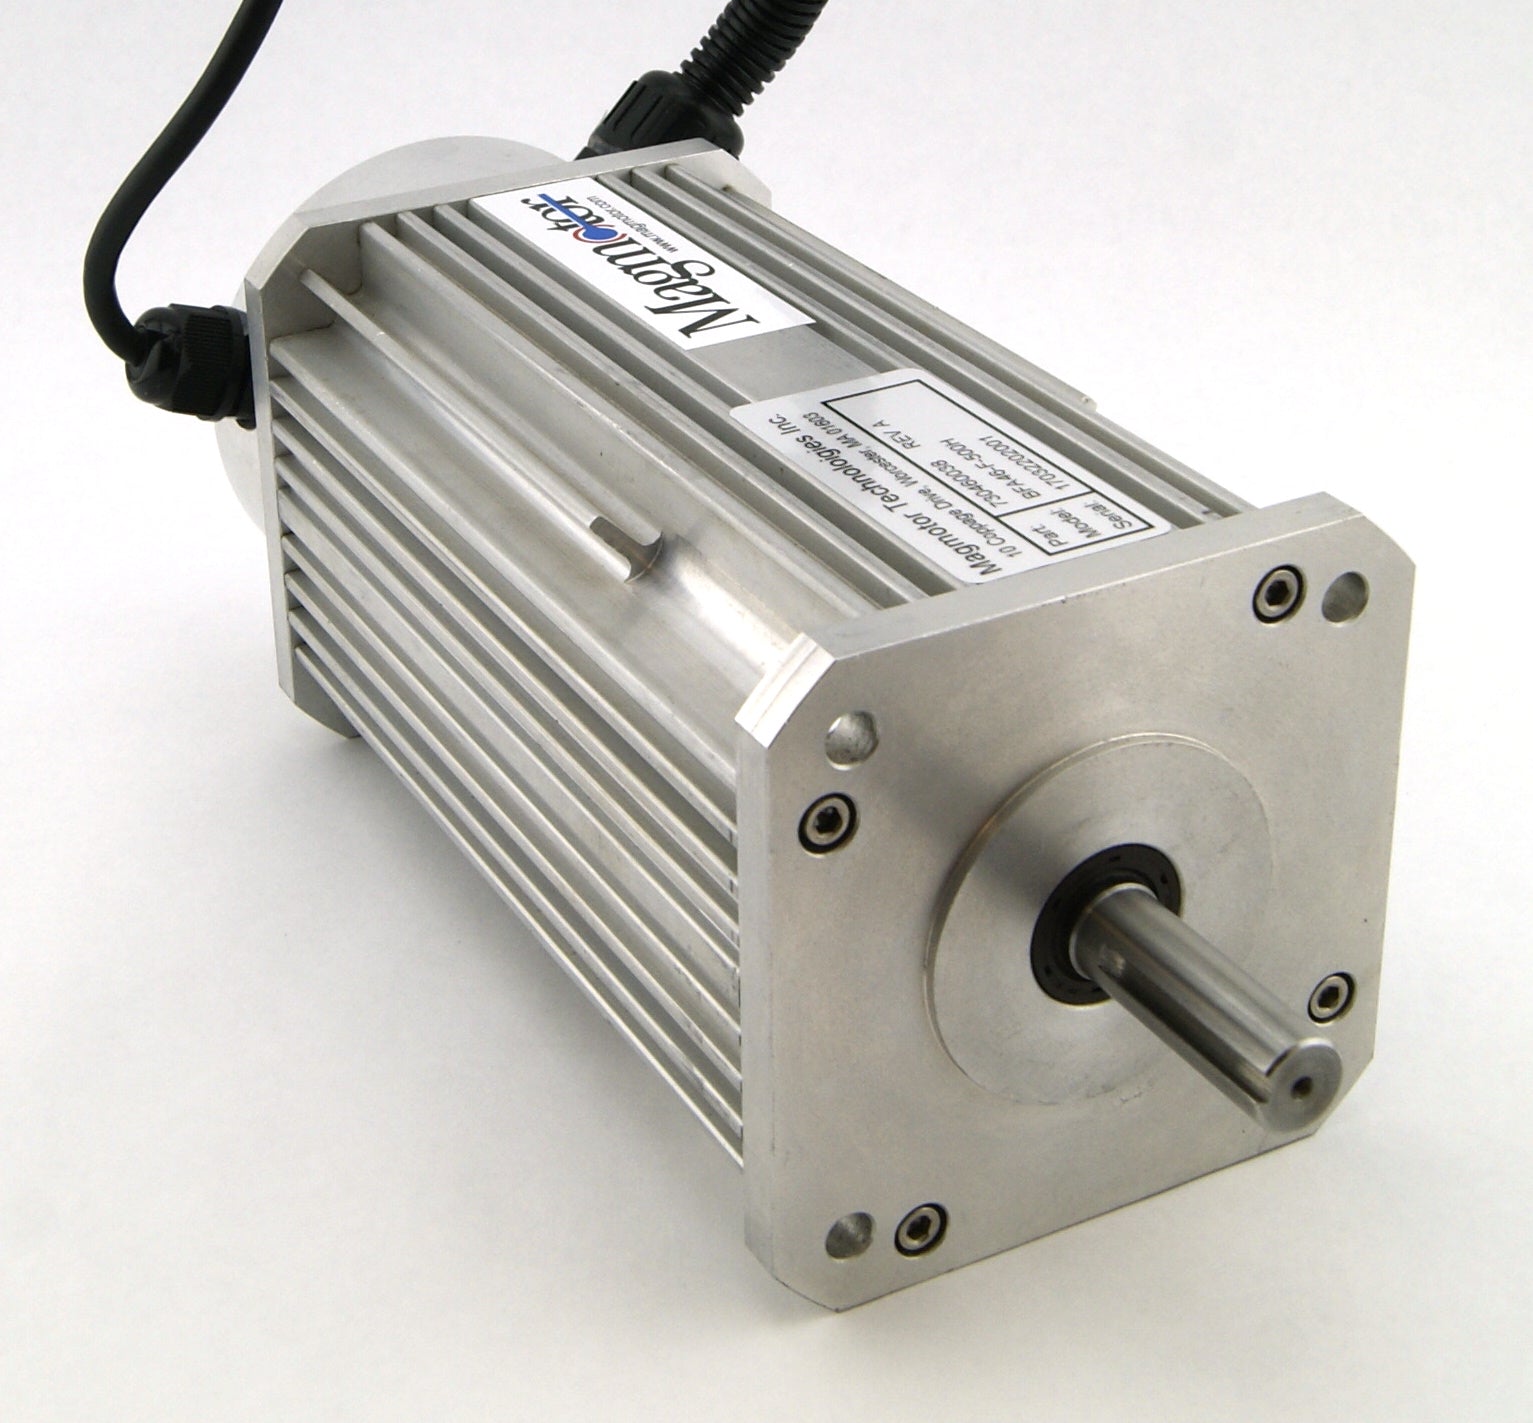 Magmotor BFA46-F-500H 100 to 168 Volt 8 Pole Brushless Motor 730460038 Front View